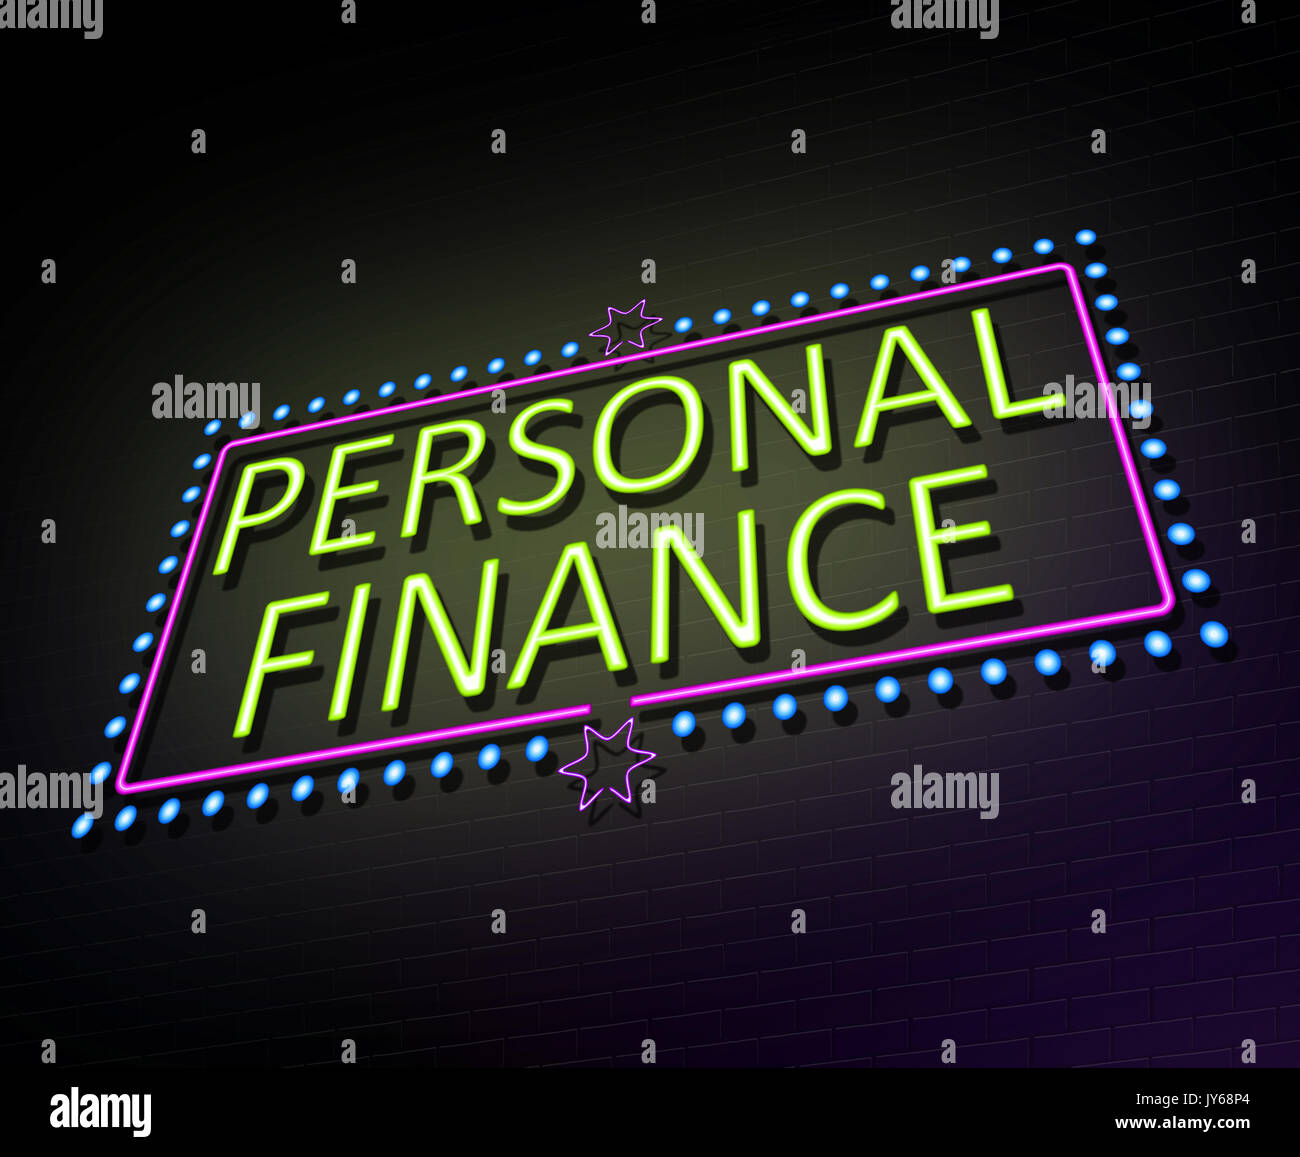 3d Illustration depicting an illuminated neon sign with a personal finance concept. Stock Photo